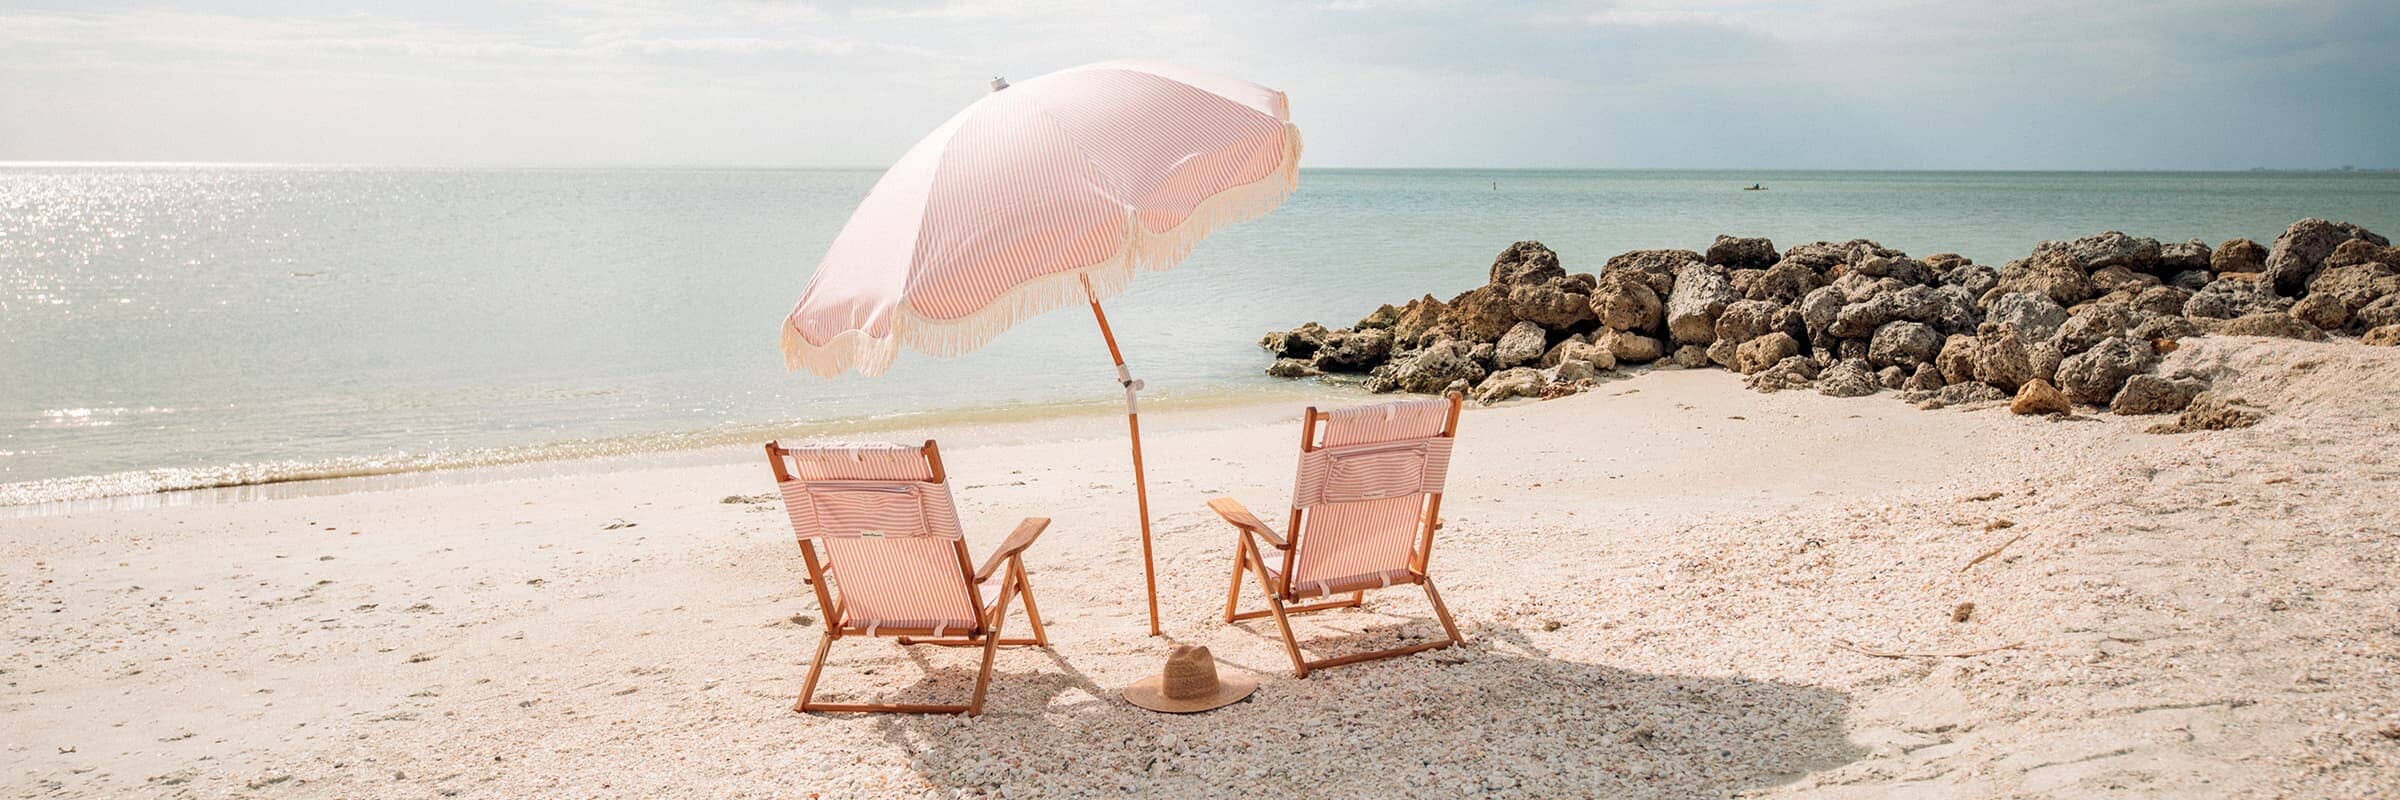 pink striped beach umbrella and two chairs on the sand